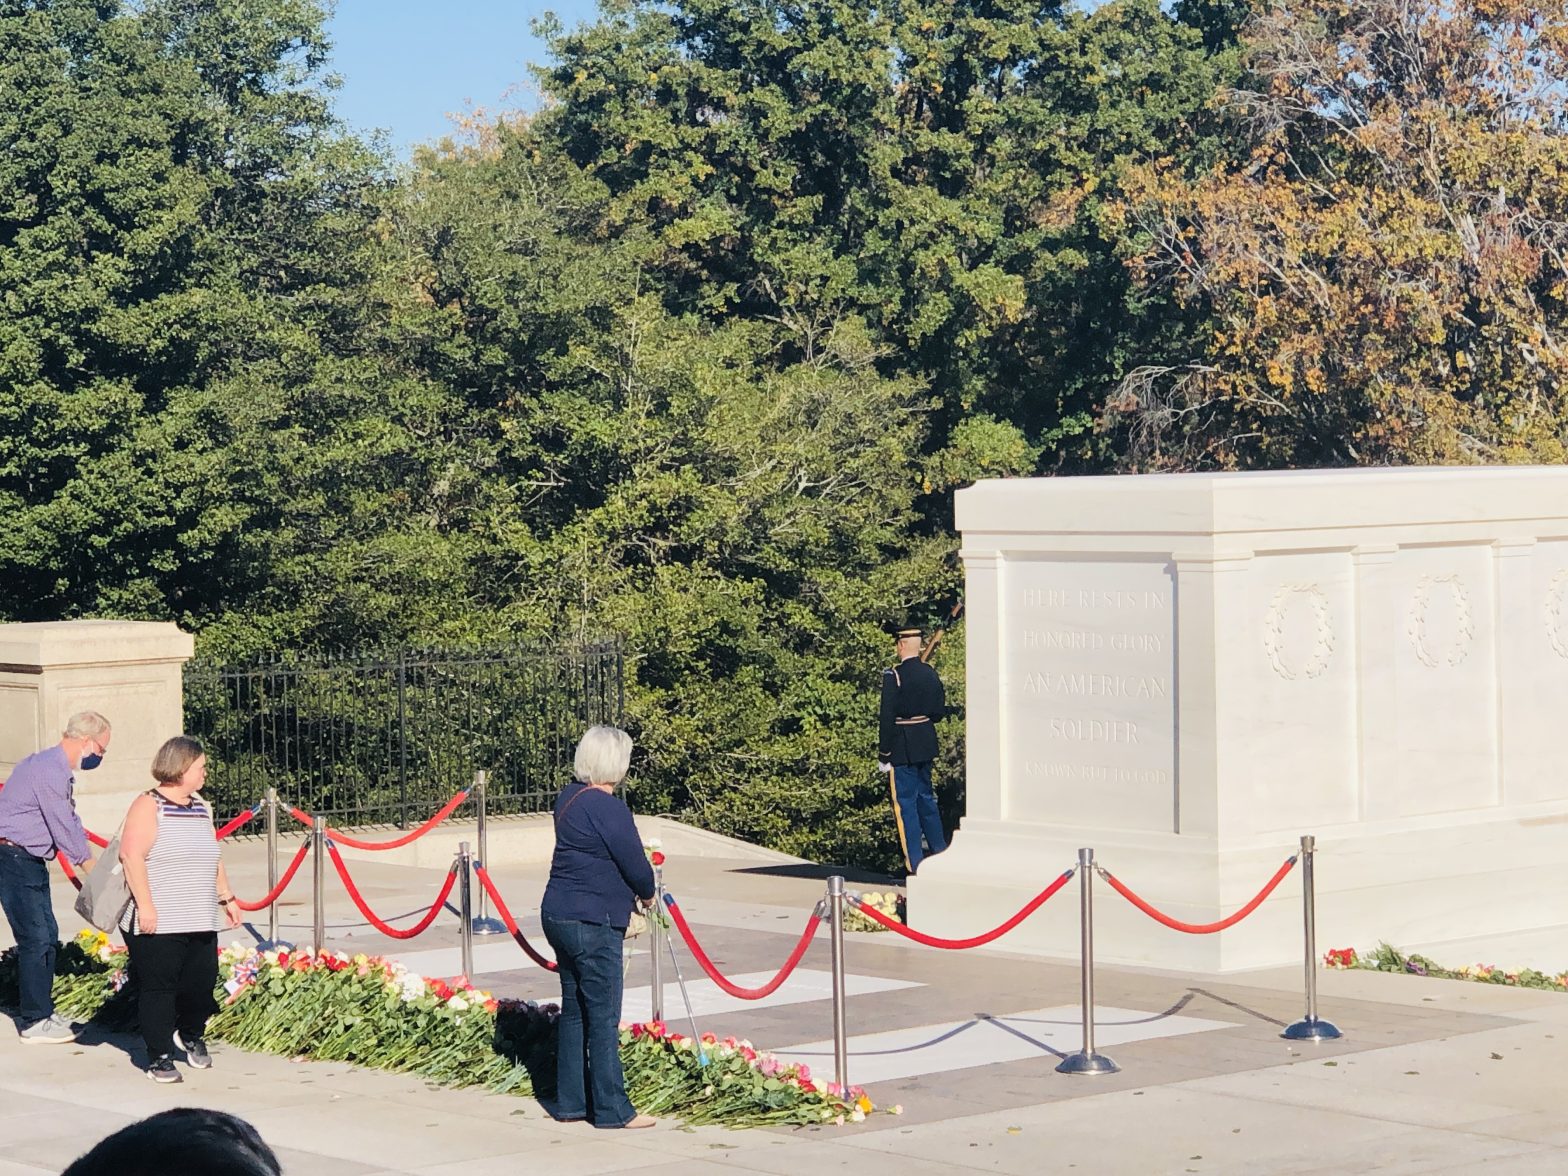 Public Given Rare Access at Centennial for the Tomb of the Unknown Soldier